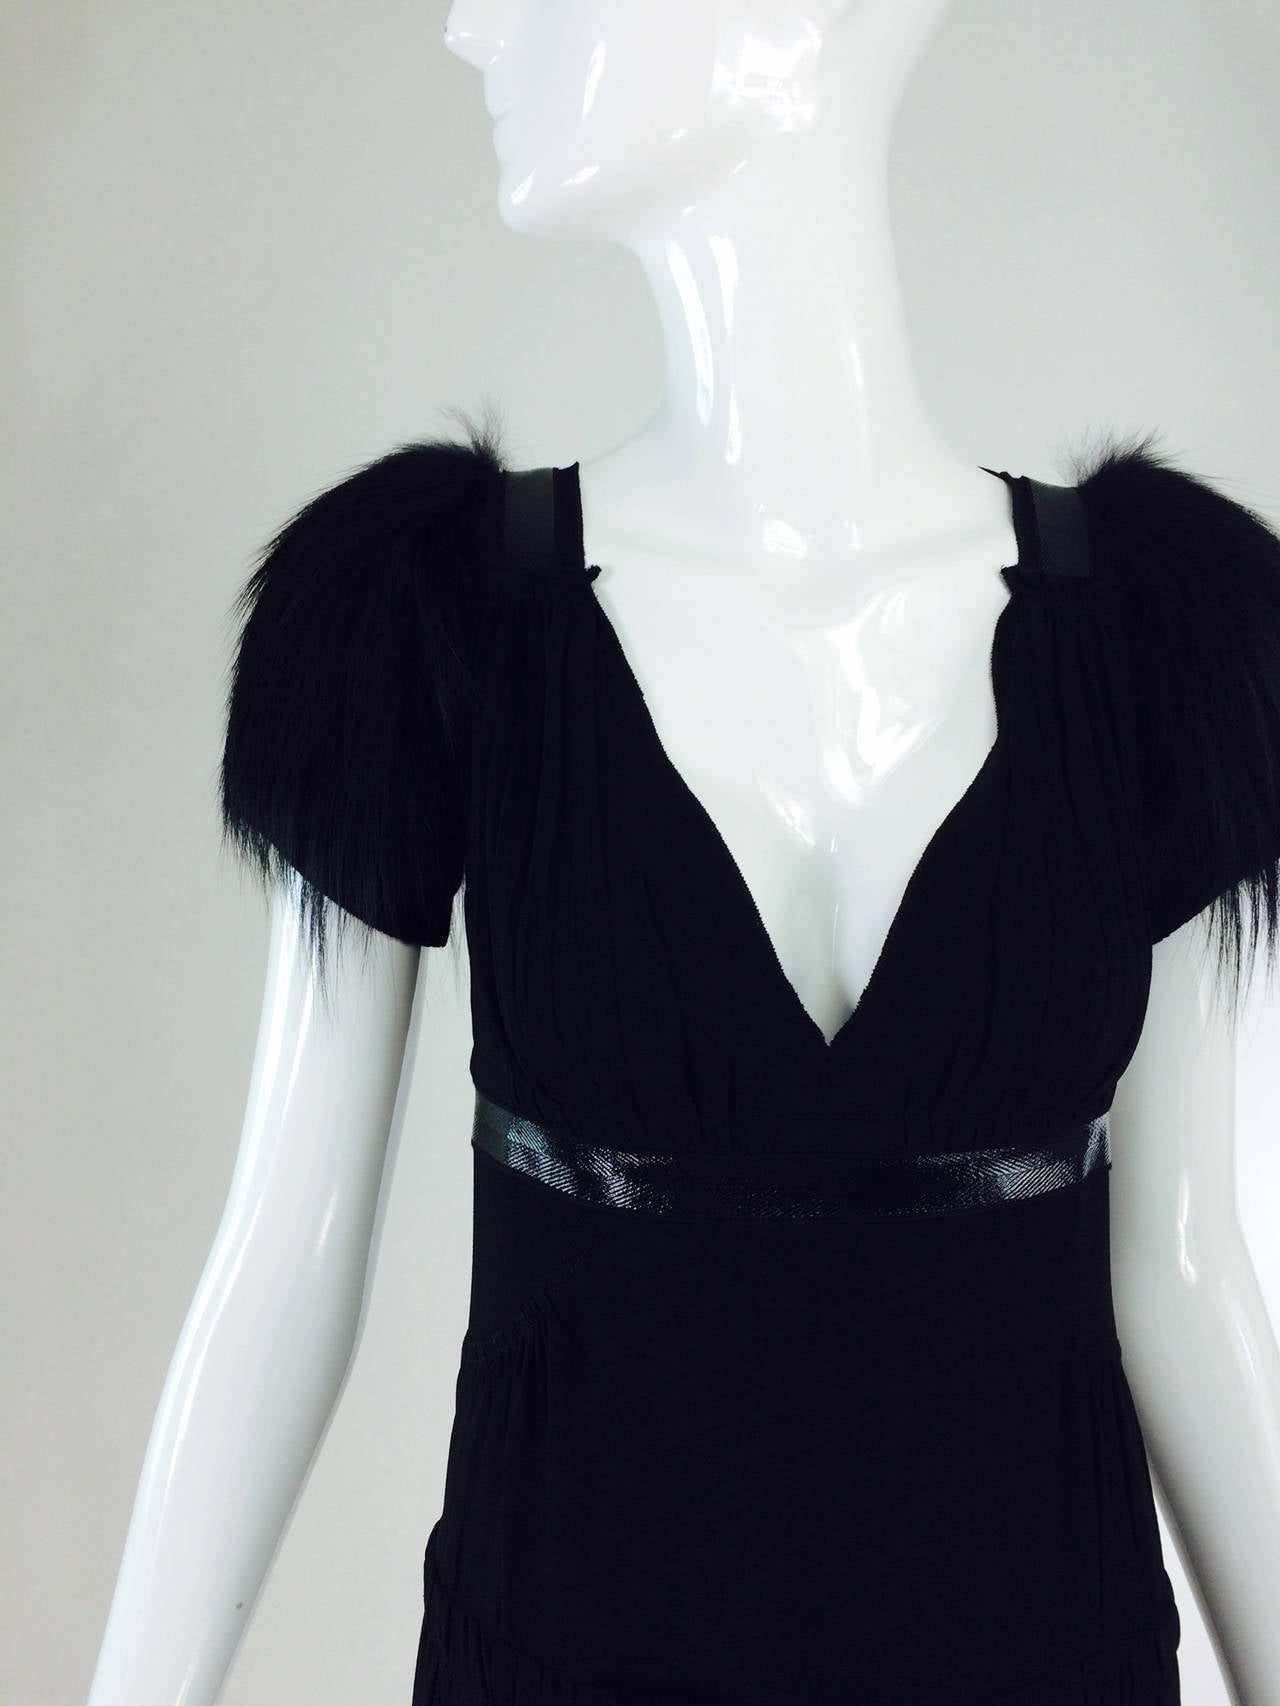 Prada black fox fur sleeve plunge front cocktail dress from 2007 with tags, retail $2365.  V plunge neckline and back with a tie at the neck back to keep the dress in place. The shoulder tops are covered with black fox fur, the sleeves are knit. The